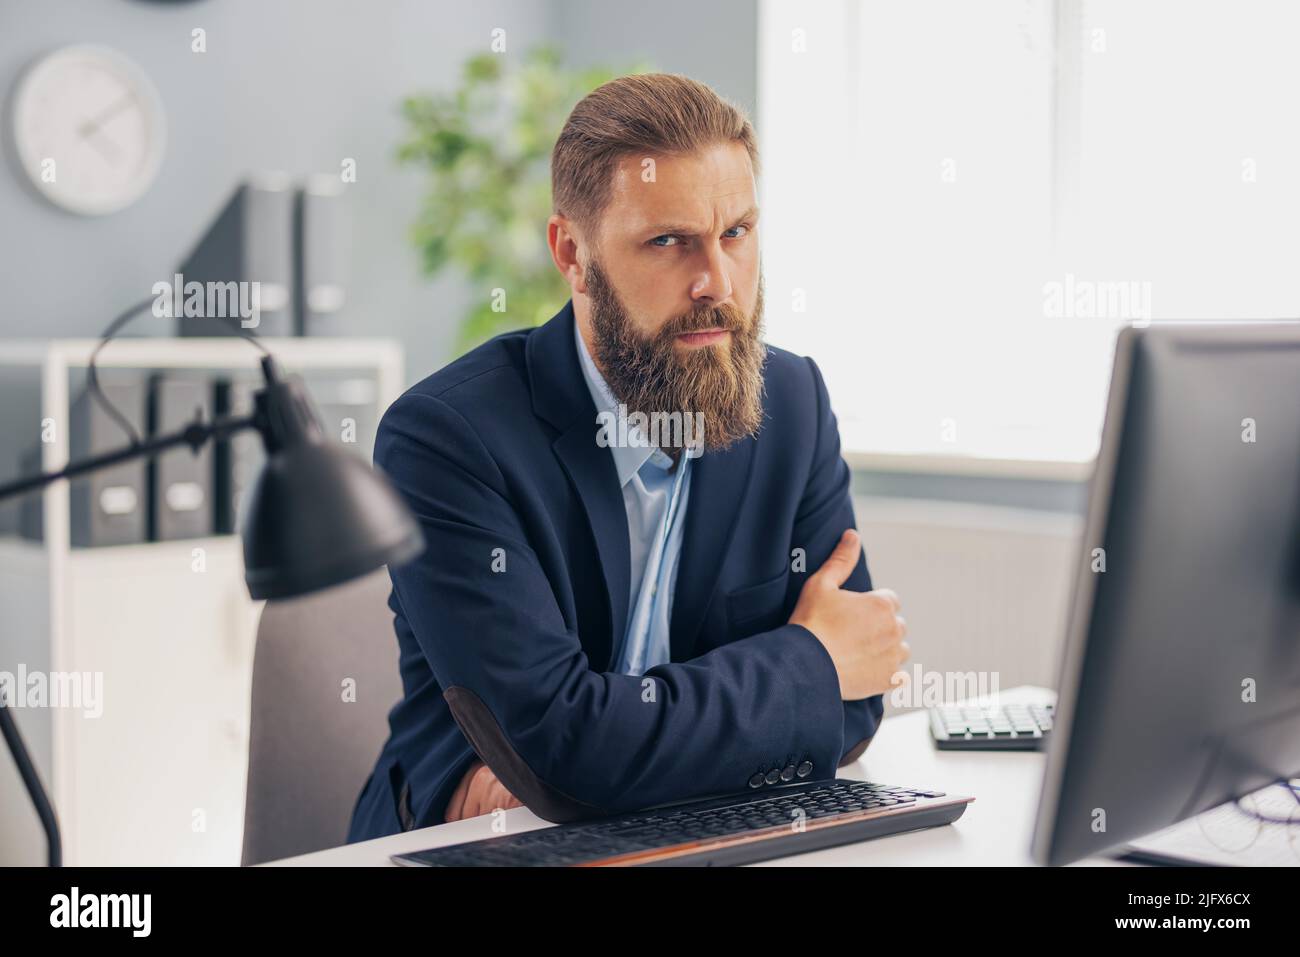 Pensive man working in office Stock Photo